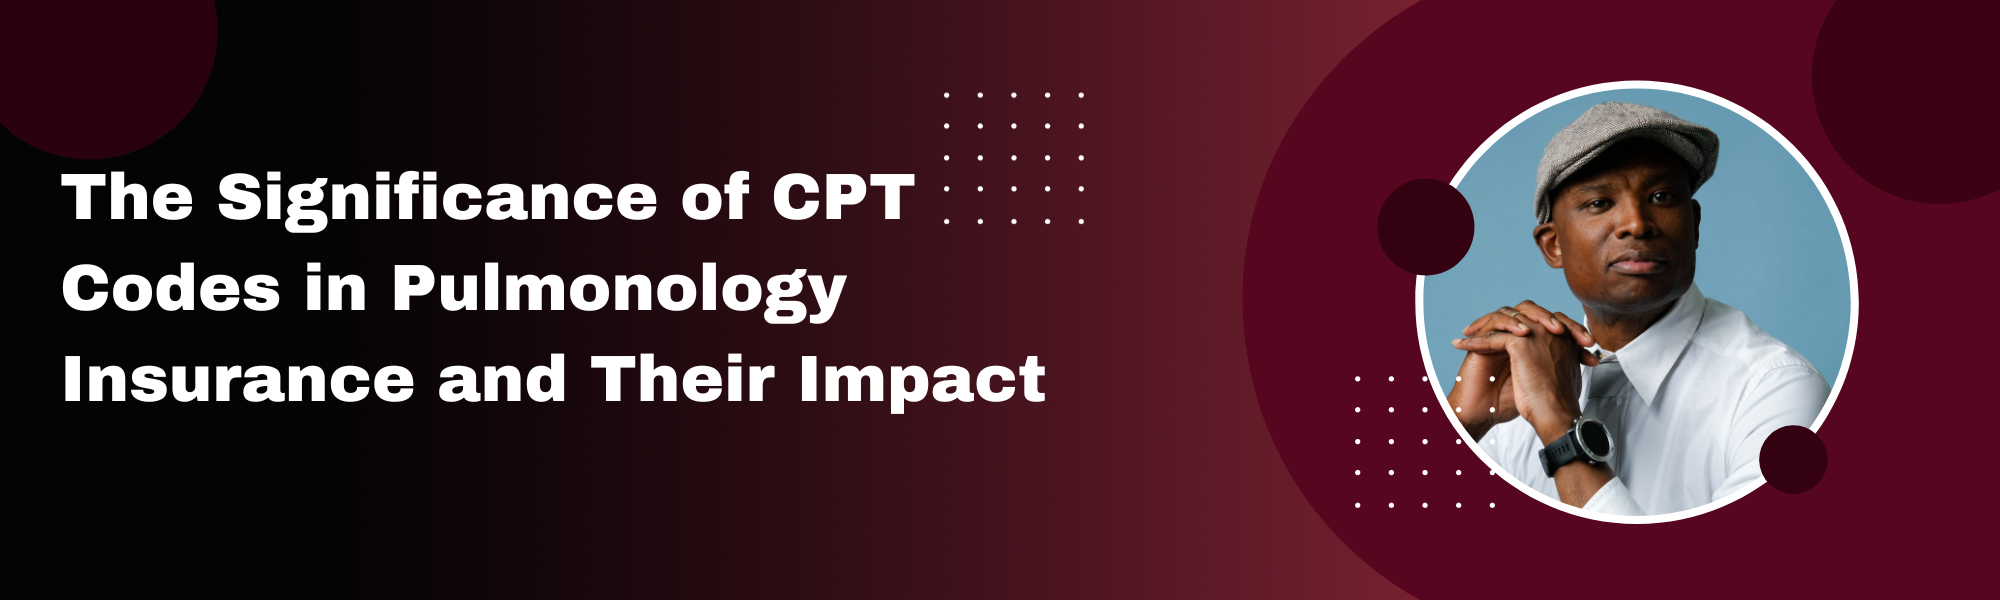 The Significance of CPT Codes in Pulmonology Insurance and Their Impact